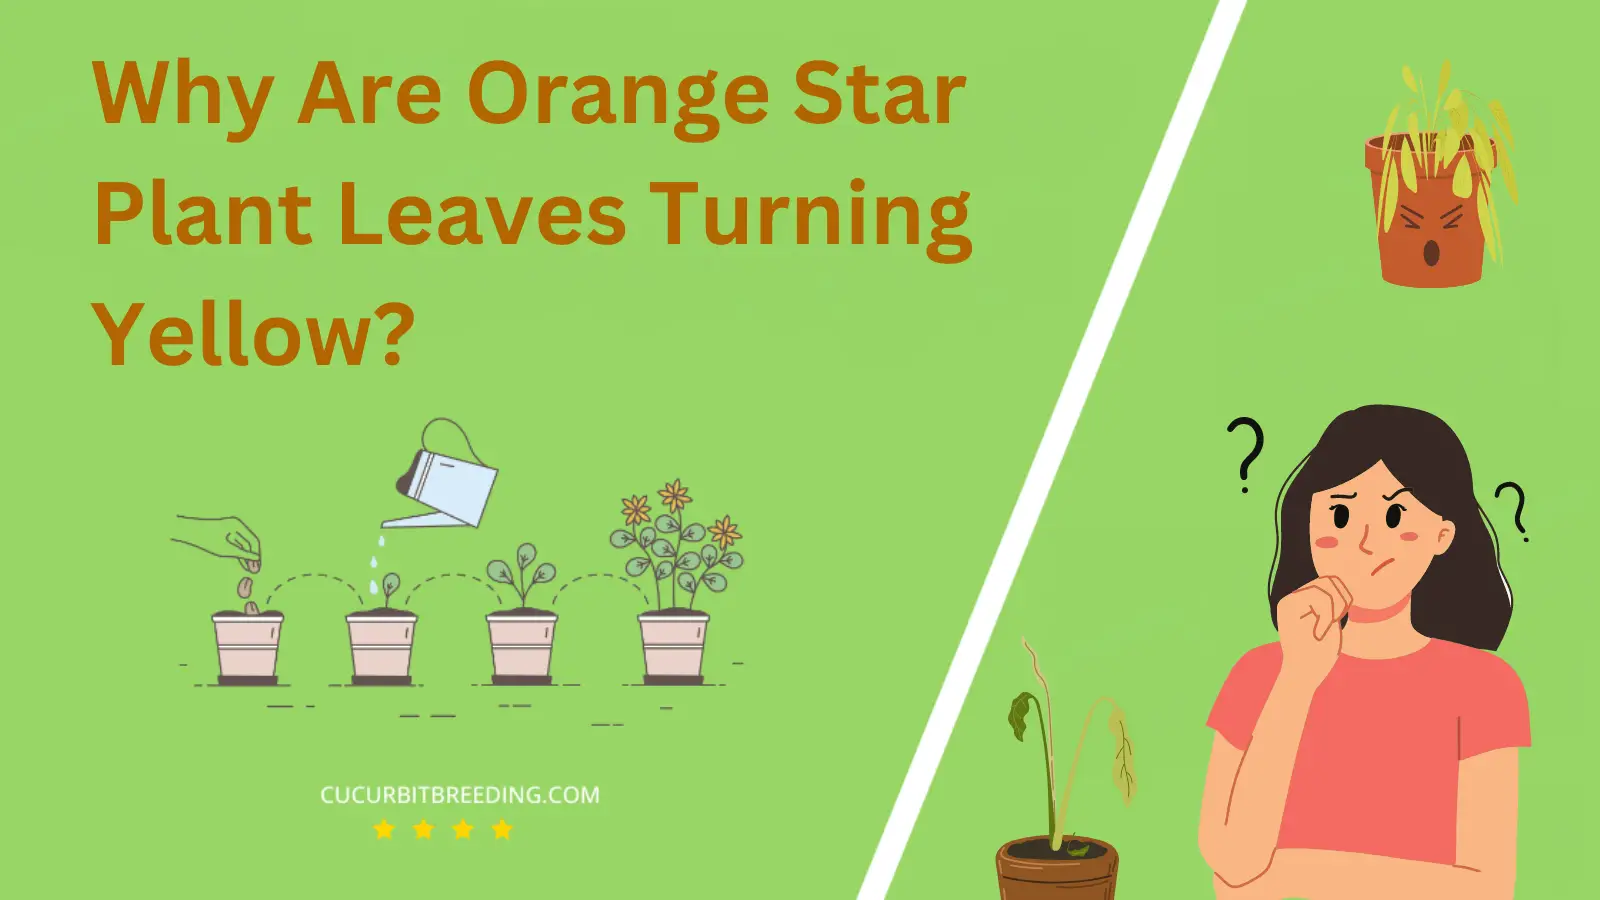 Why Are Orange Star Plant Leaves Turning Yellow